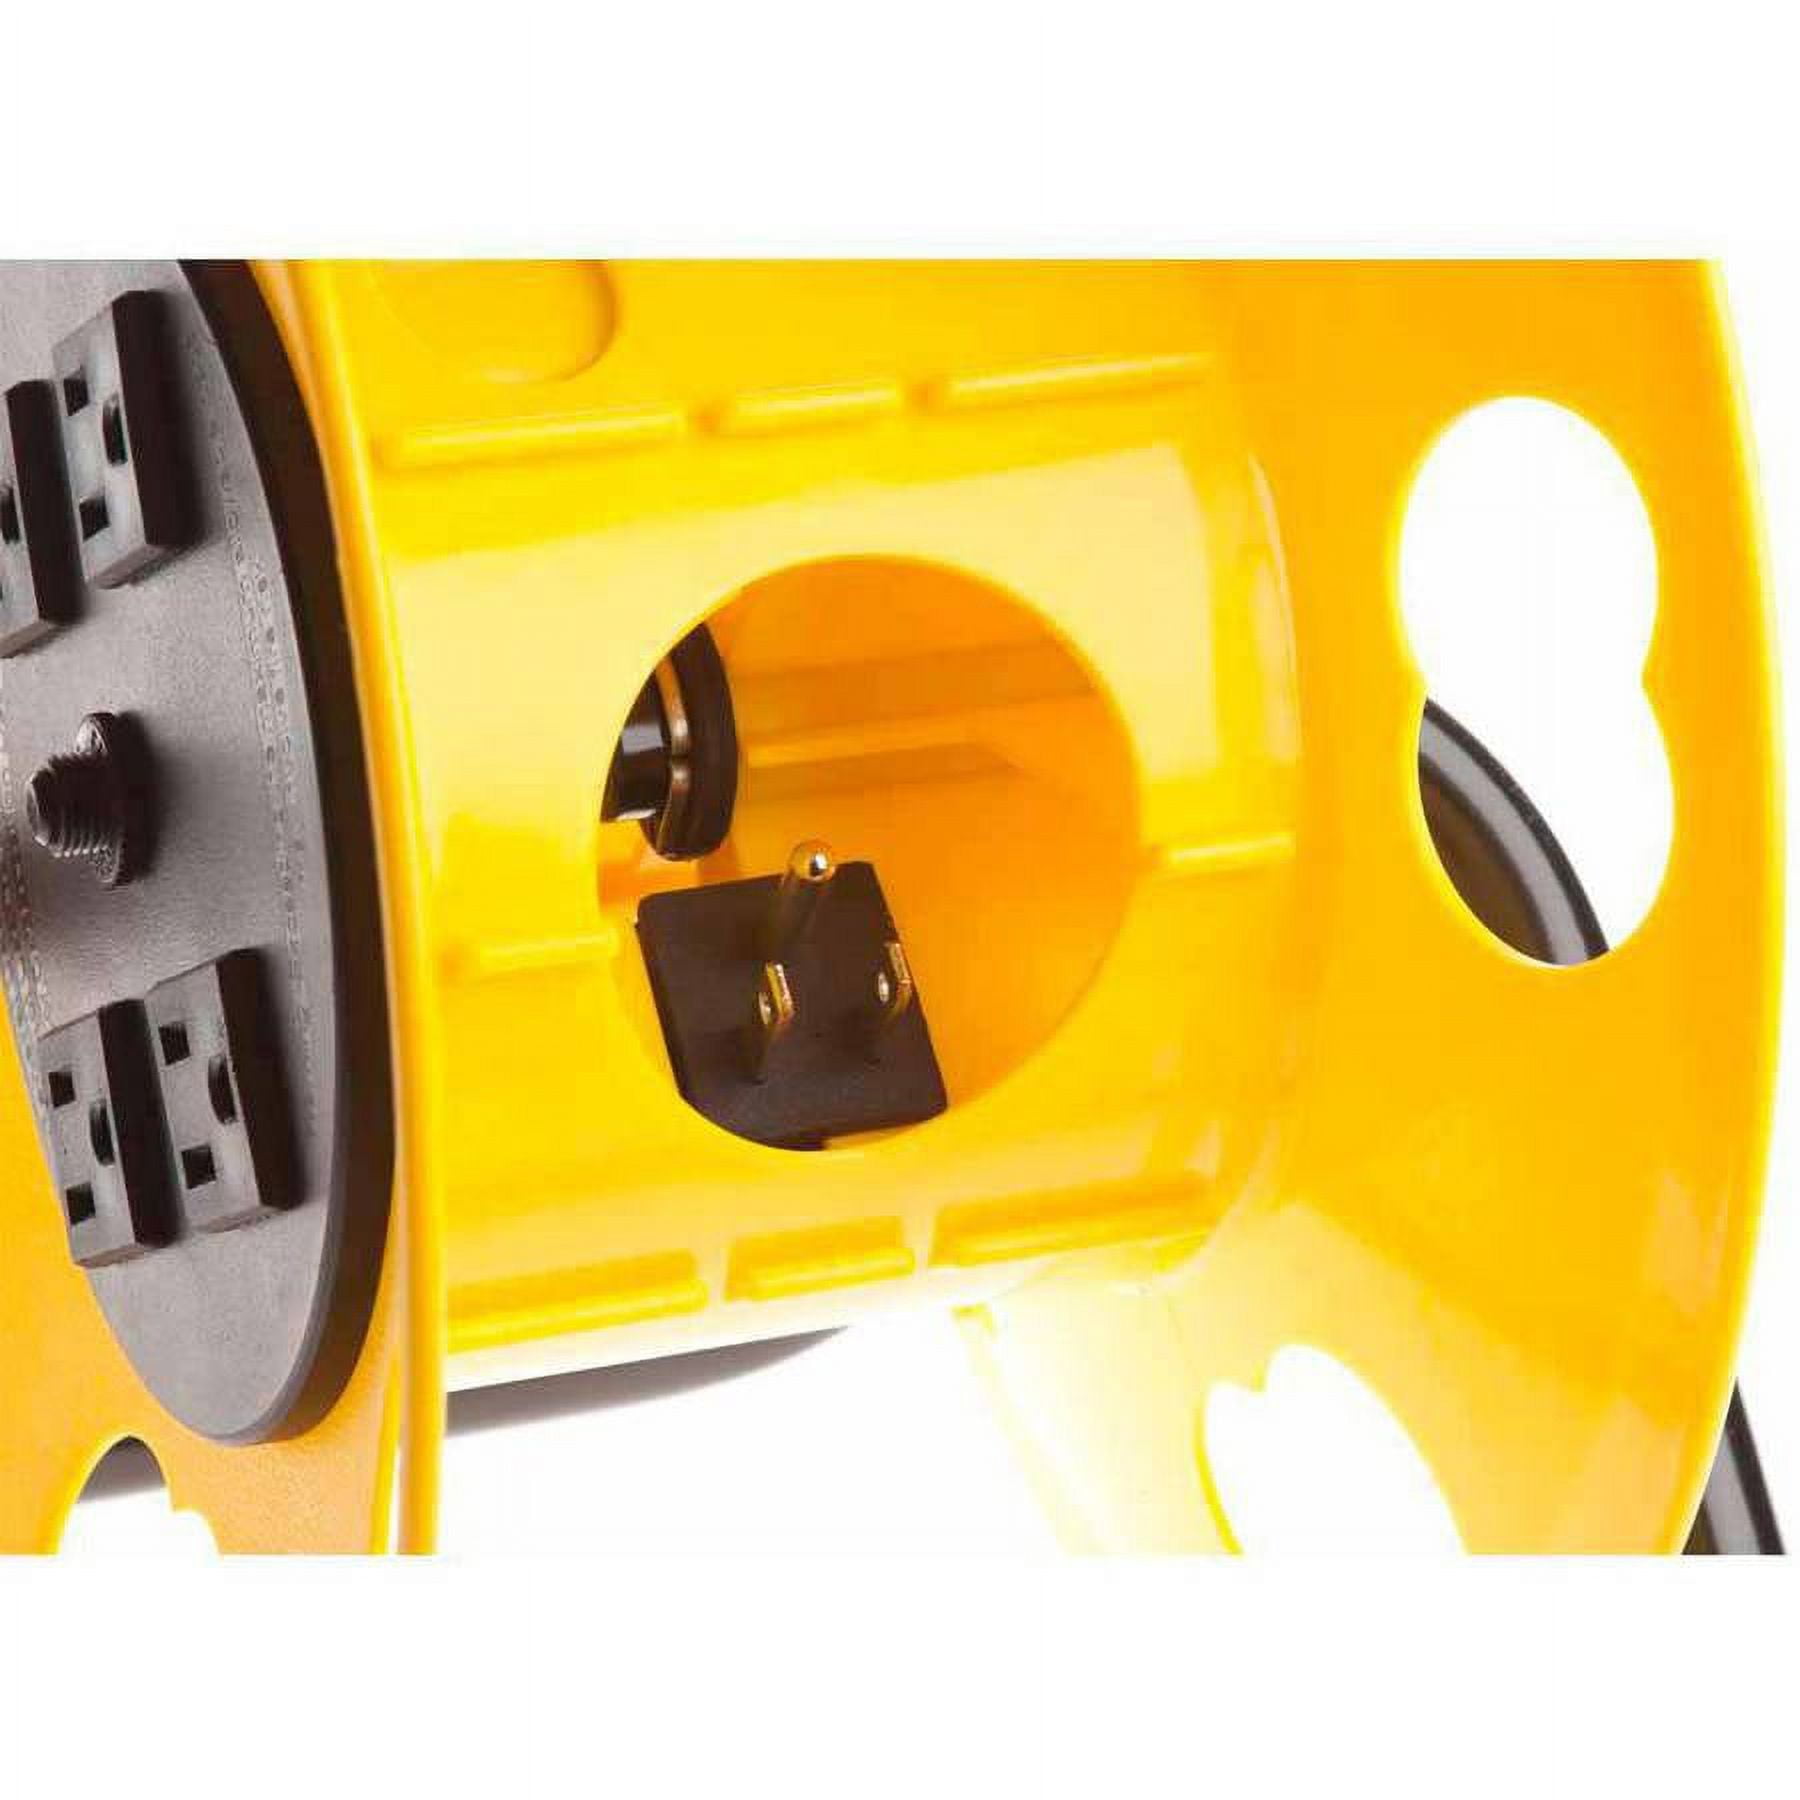 Bayco SL2000PDQ - Add-A-Cord Quad Tap Cord Reel With Circuit Breaker Yellow  With Black Handle